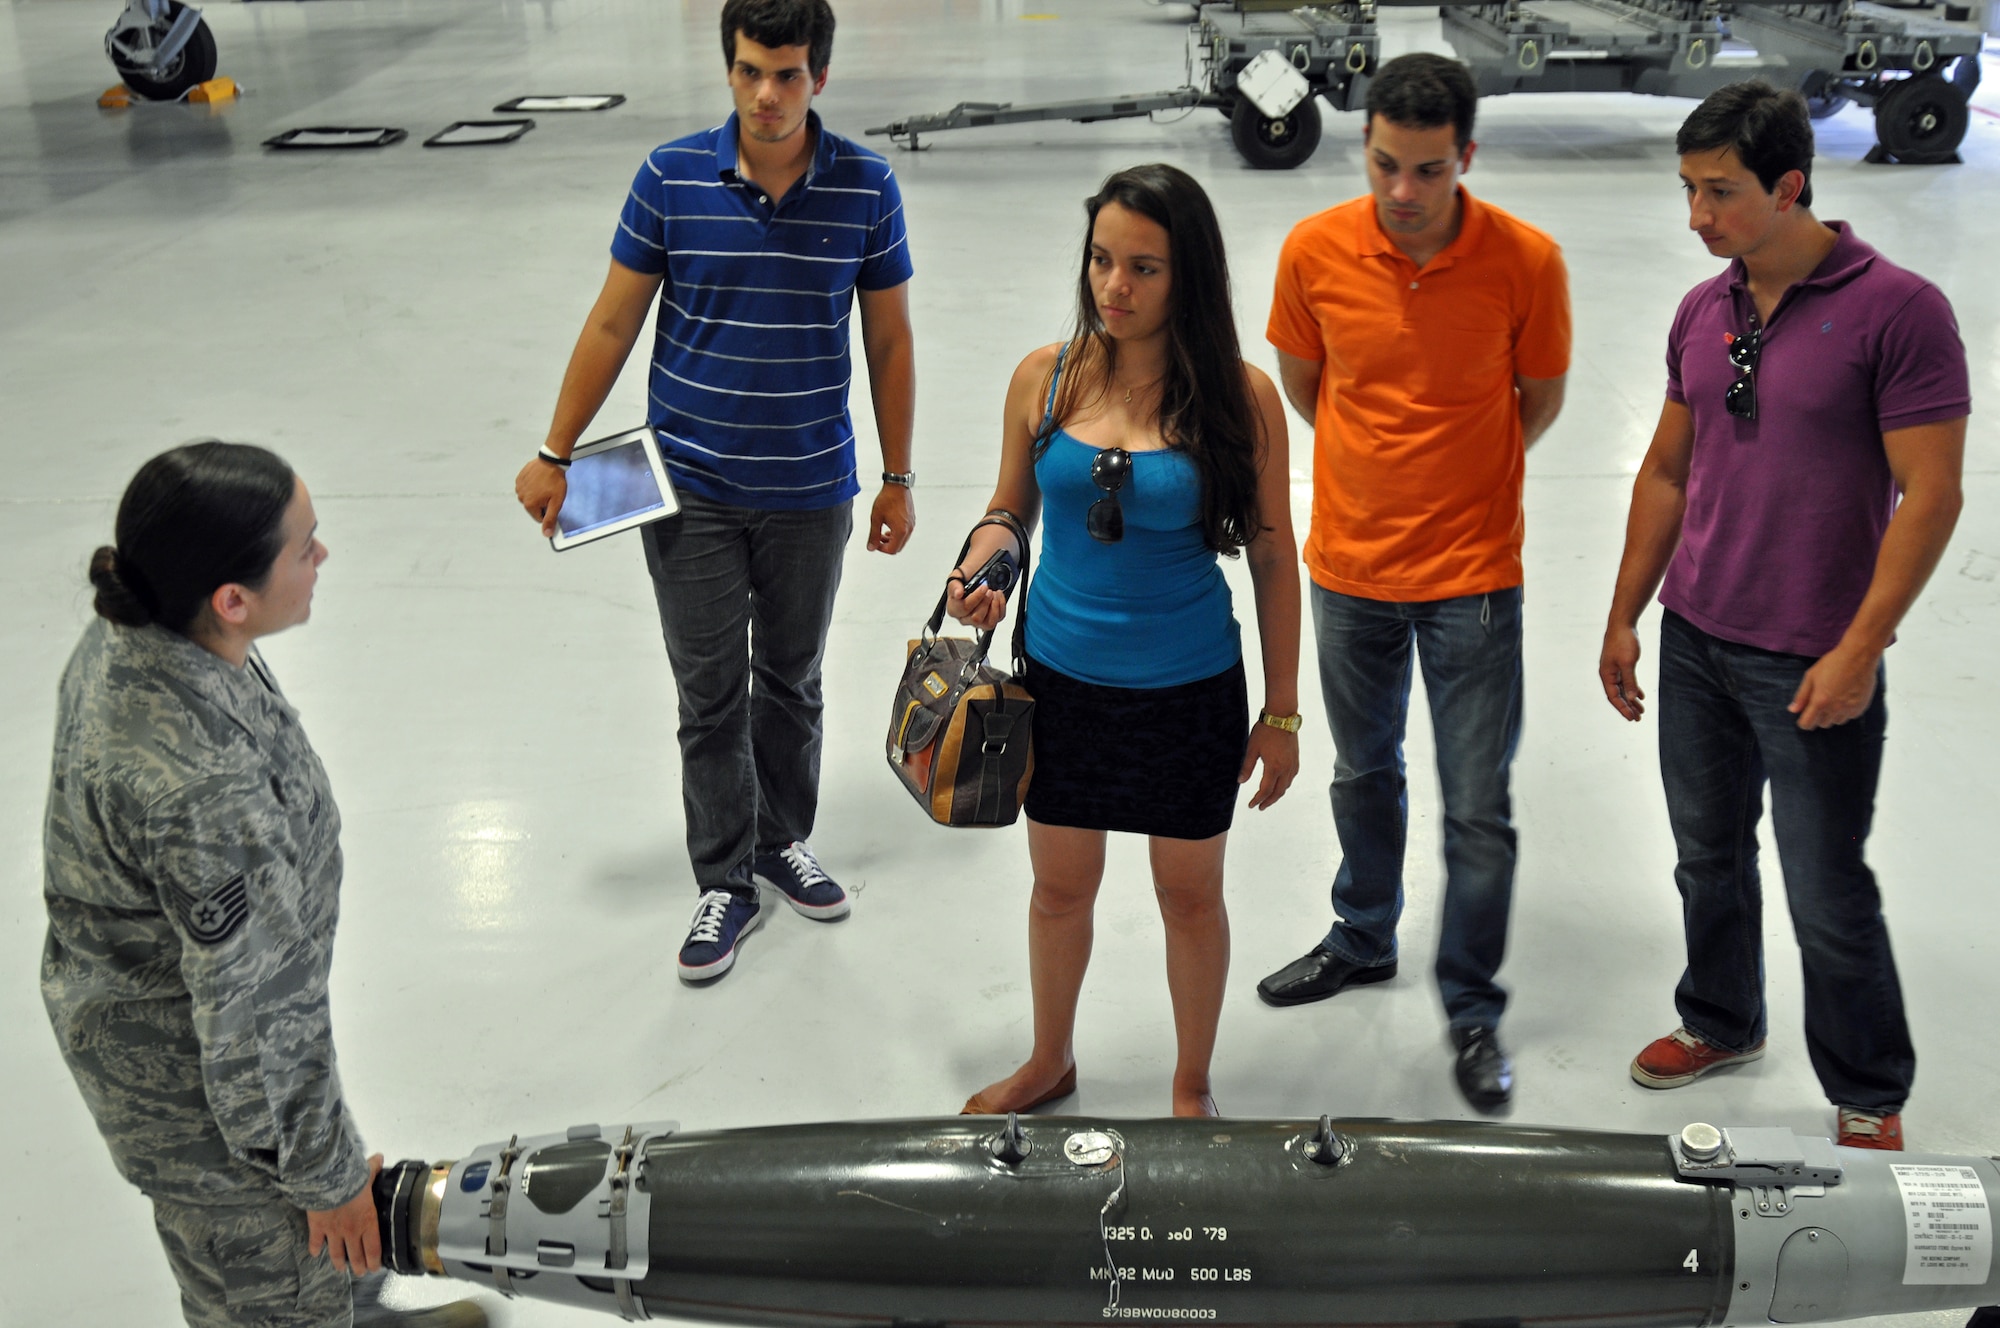 Graduate and doctoral engineering students from Brazil discuss the Joint Direct Attack Munition GBU-38 bomb with Tech. Sgt. Loraine Goody, a load standardization crew member assigned to the 355th Maintenance Operations Squadron, at Davis-Monthan Air Force Base, July 24. The students were in Tucson, Ariz., visiting the nearby Raytheon Company as part of Brazil’s Science Without Borders program and requested the opportunity to visit D-M.  The GBU-38 is the smallest version of the JDAM weighing in at approximately 500 pounds. (U.S. Air Force photo/Capt. Jonathan Simmons)